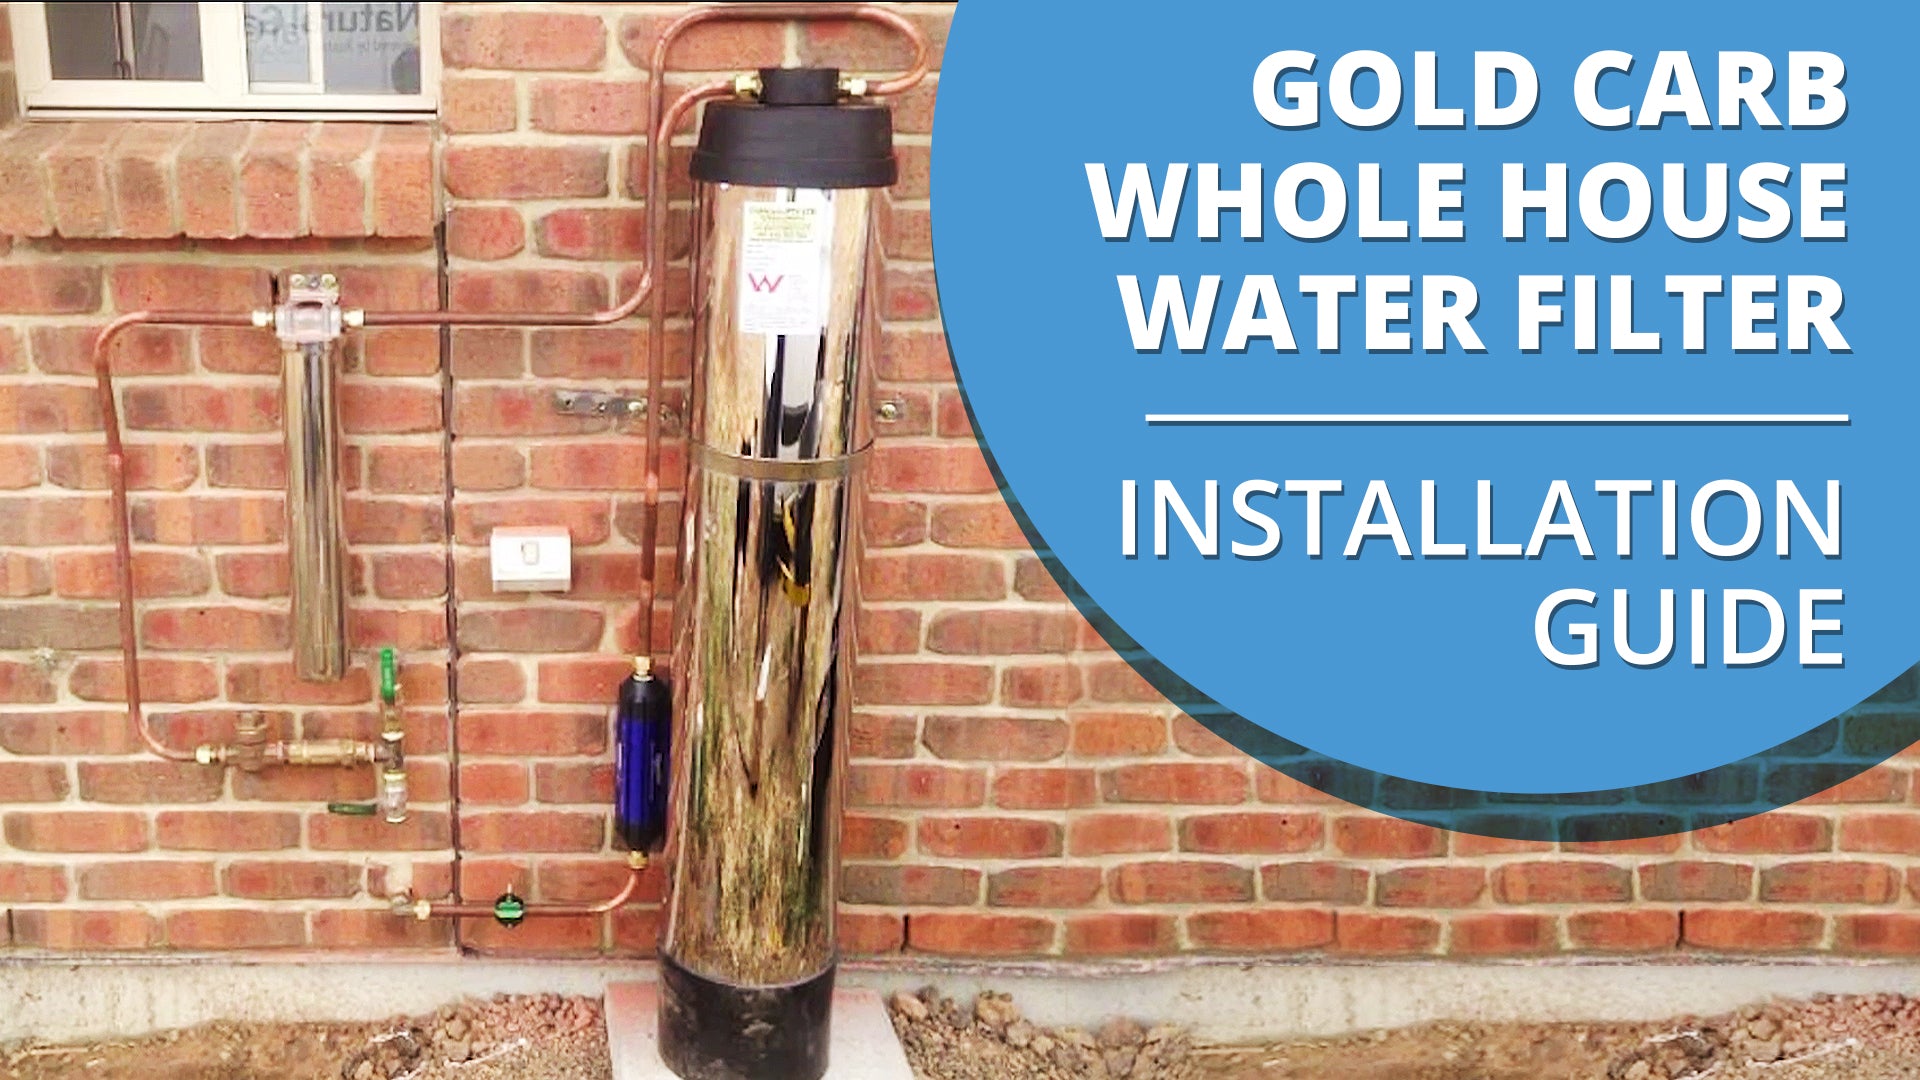 [VIDEO] How to install your Gold Carb Whole House Water Filter - Purification and Water Softener System